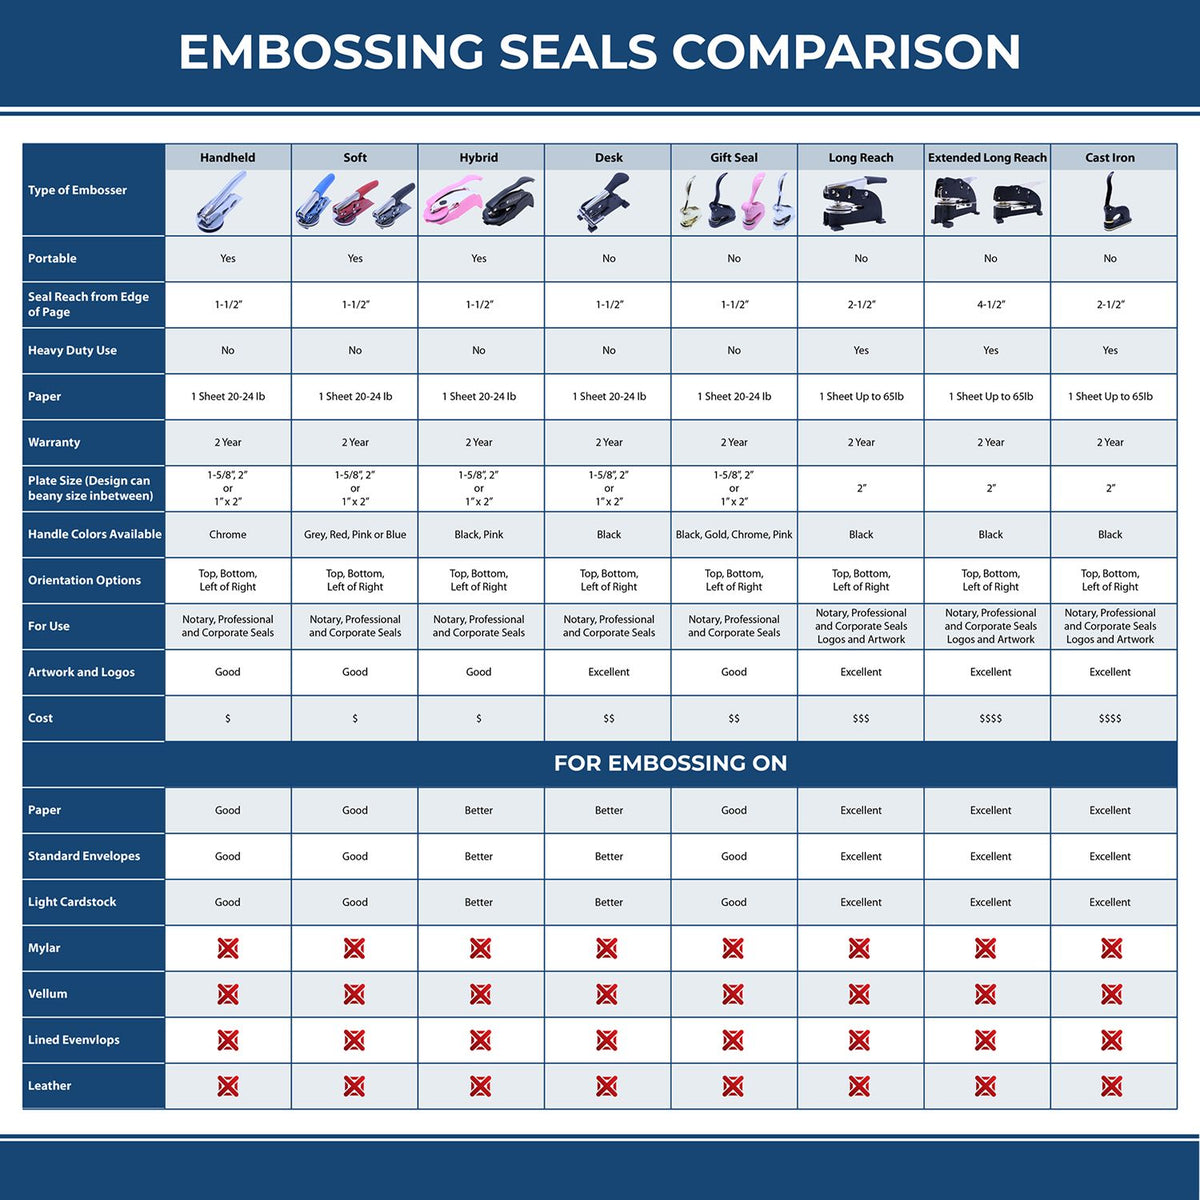 A comparison chart for the different types of mount models available for the Heavy Duty Cast Iron Illinois Engineer Seal Embosser.